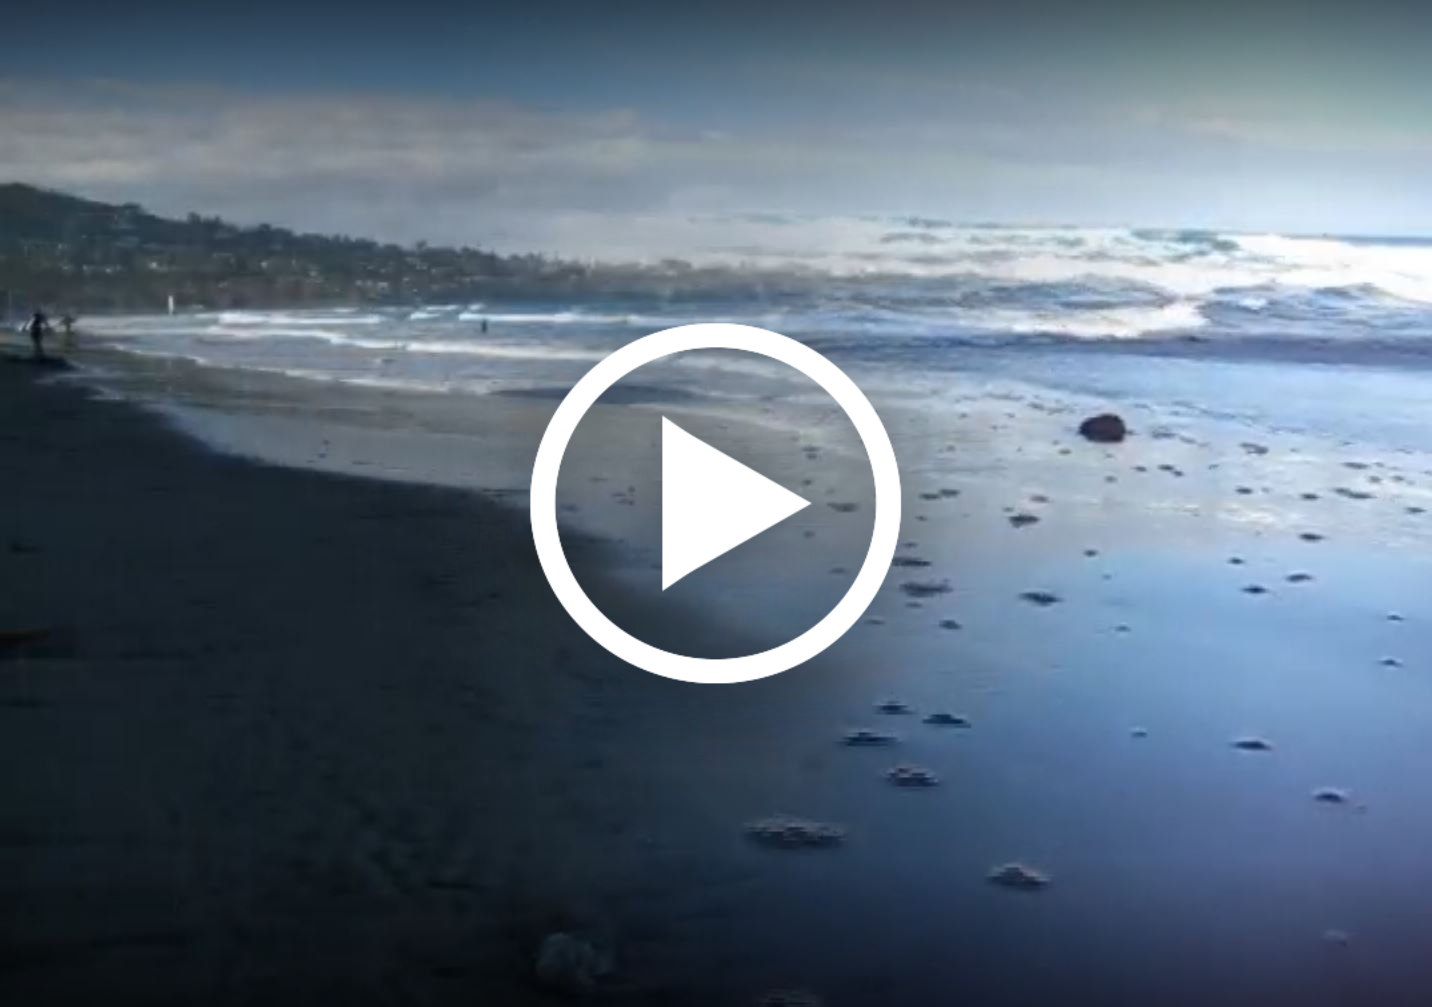 ocean and beach shoreline, with play video icon